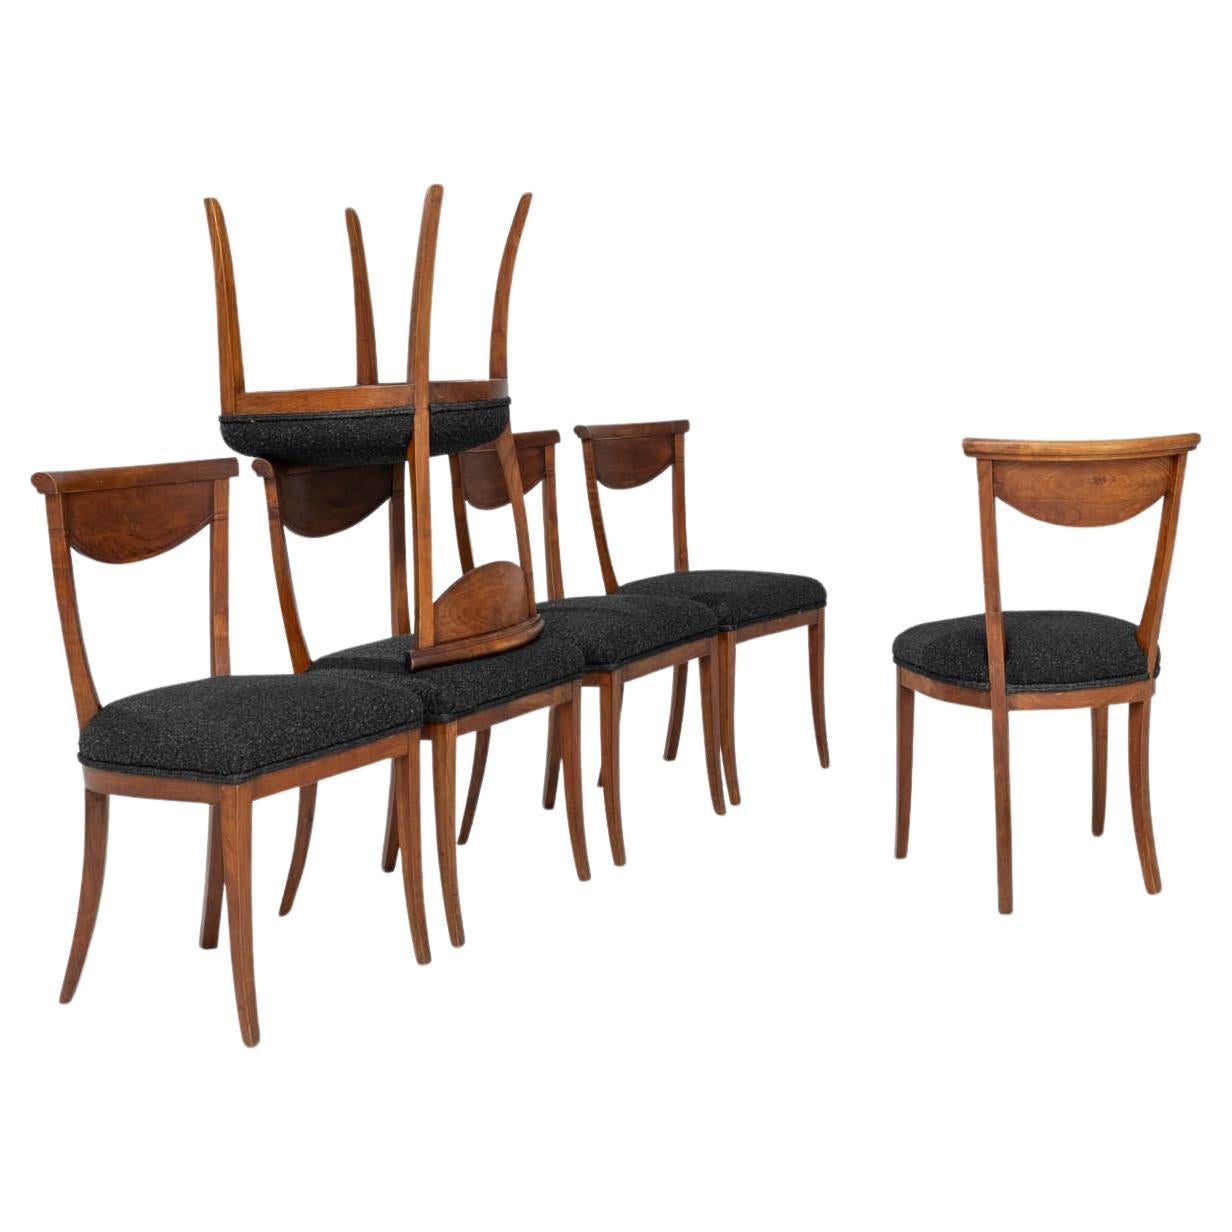 19th Century French Wooden Dining Chairs With Upholstered Seats, Set of 6